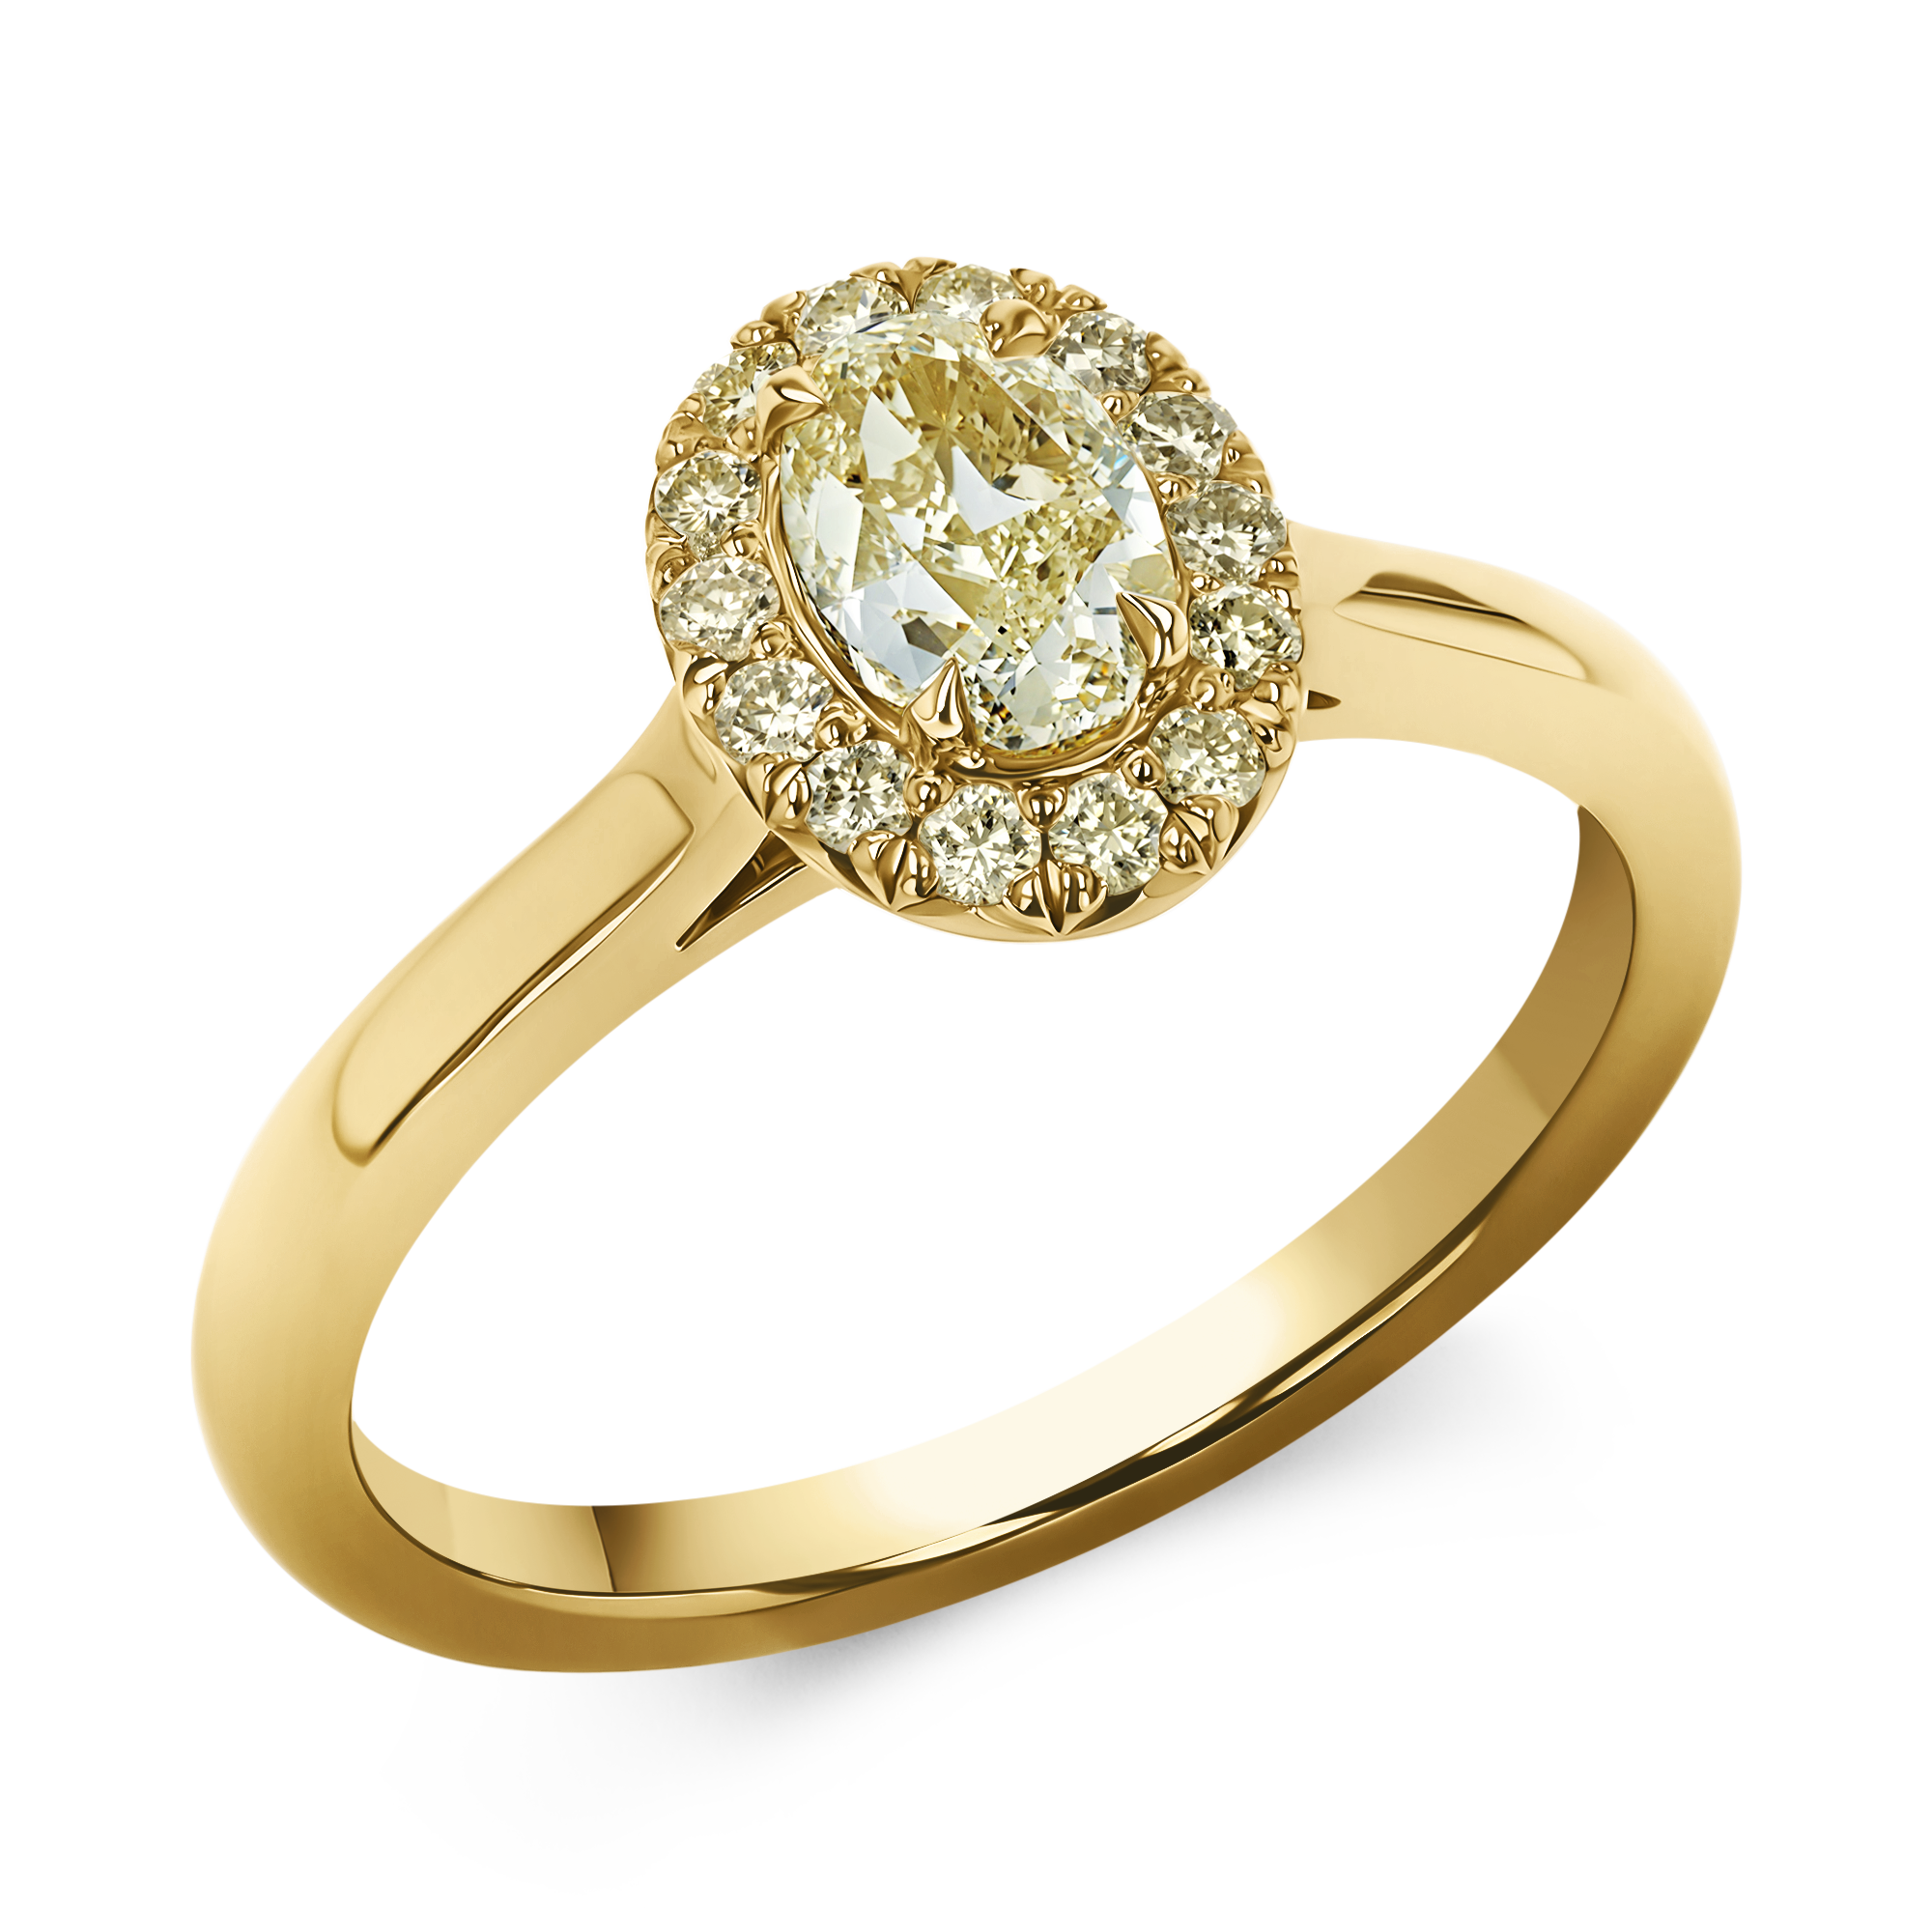 Celestial 0.72ct Fancy Yellow Diamond Cluster Ring Oval Cut, Claw Set_1